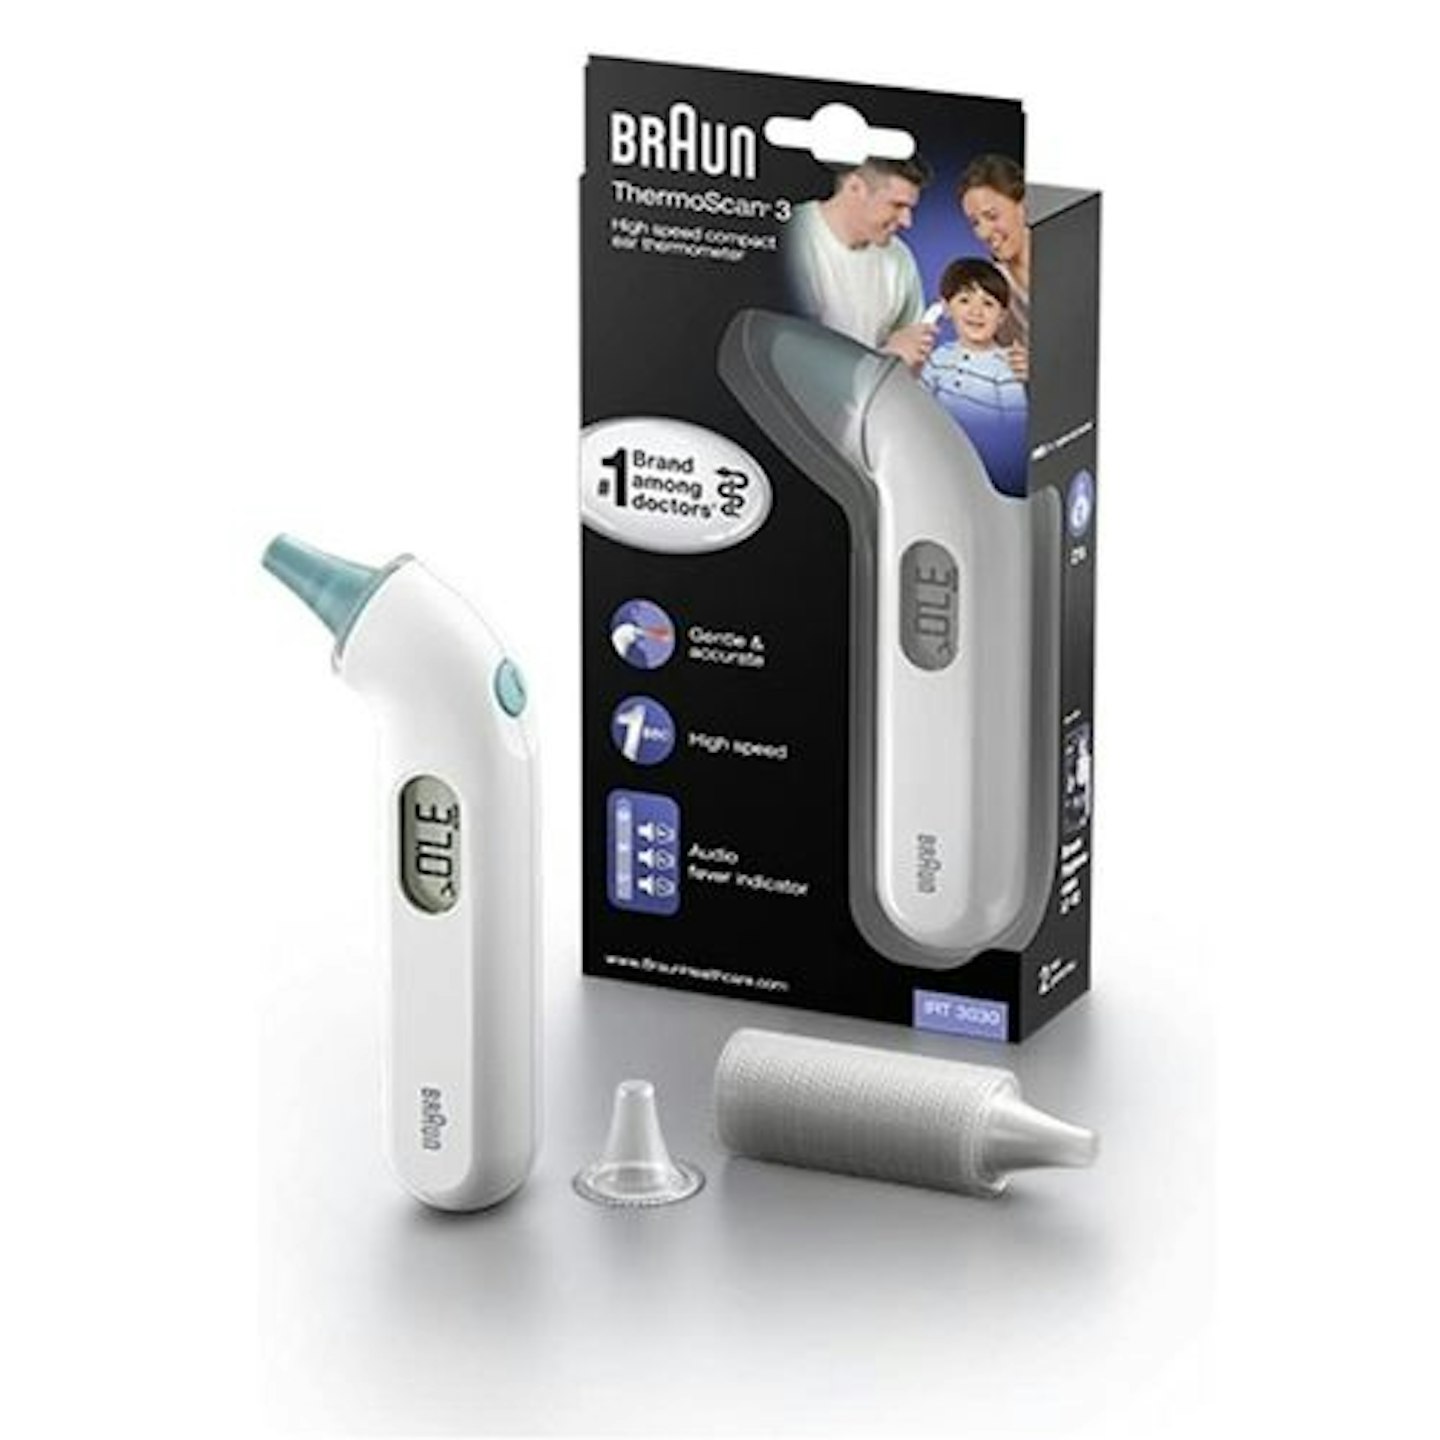 Braun-ThermoScan-3-Ear-Thermometer